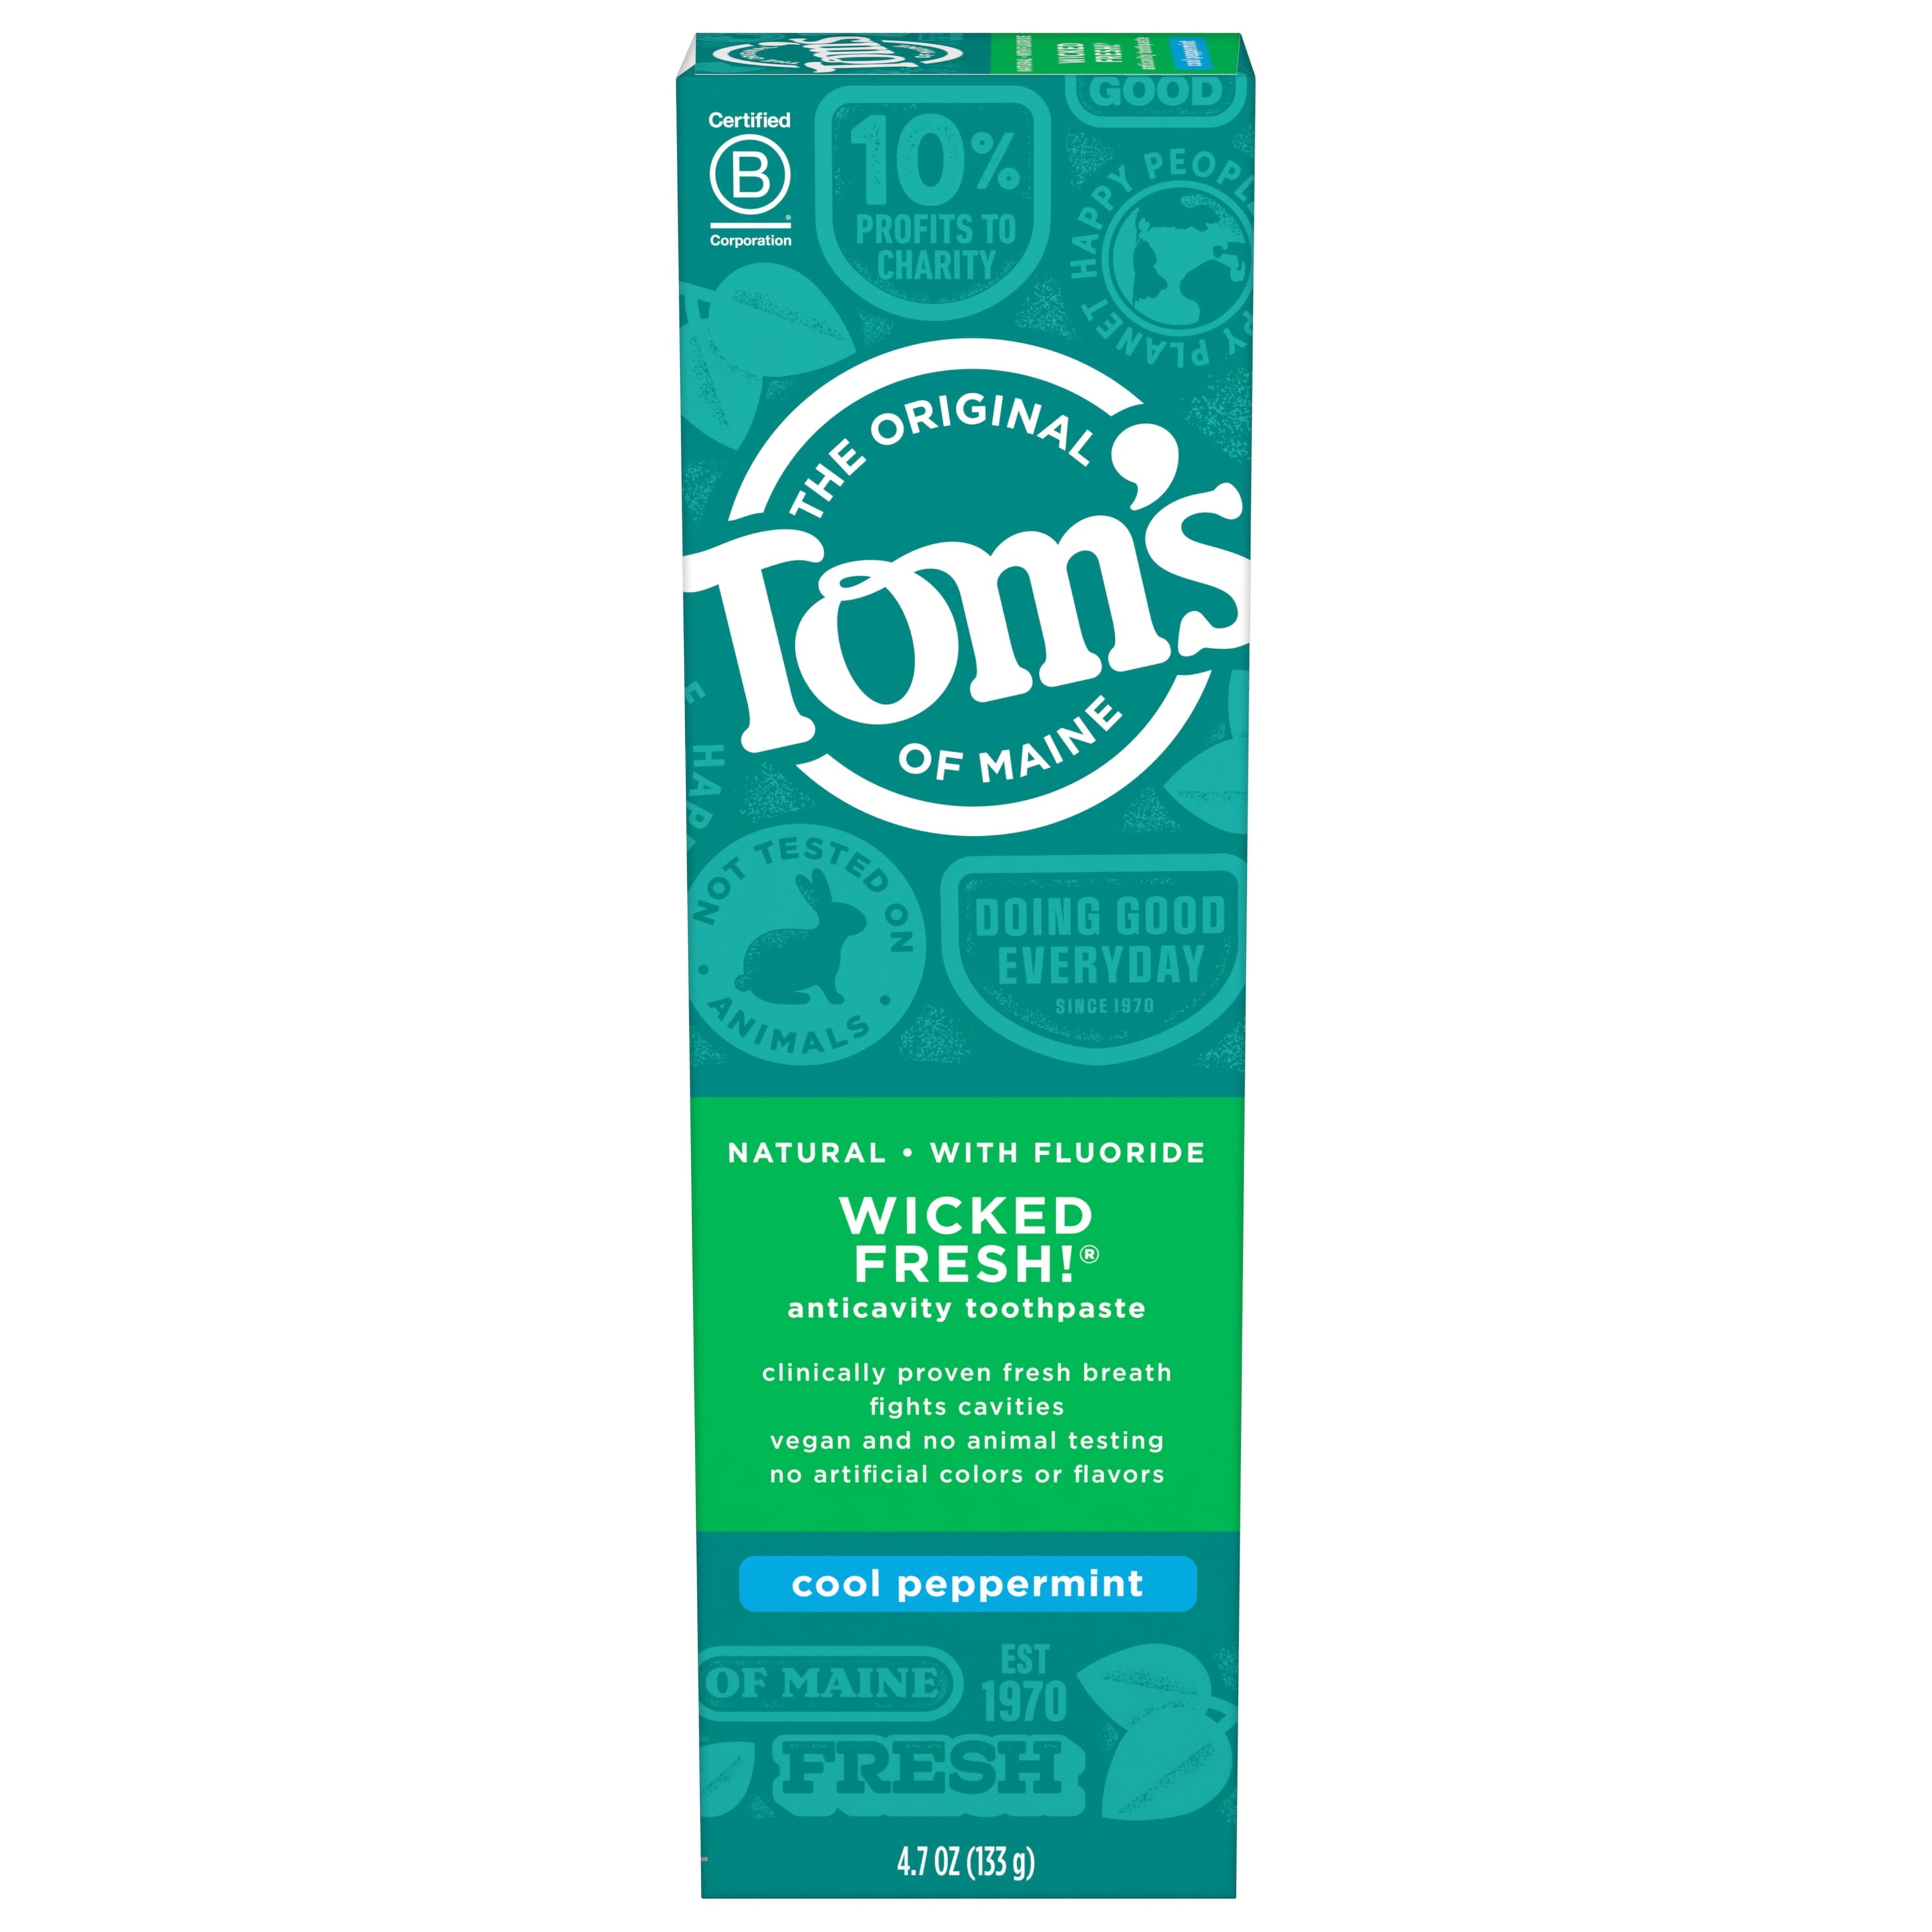 Tom's of Maine Wicked Fresh Cool Peppermint Toothpaste 4.7 Oz Tube